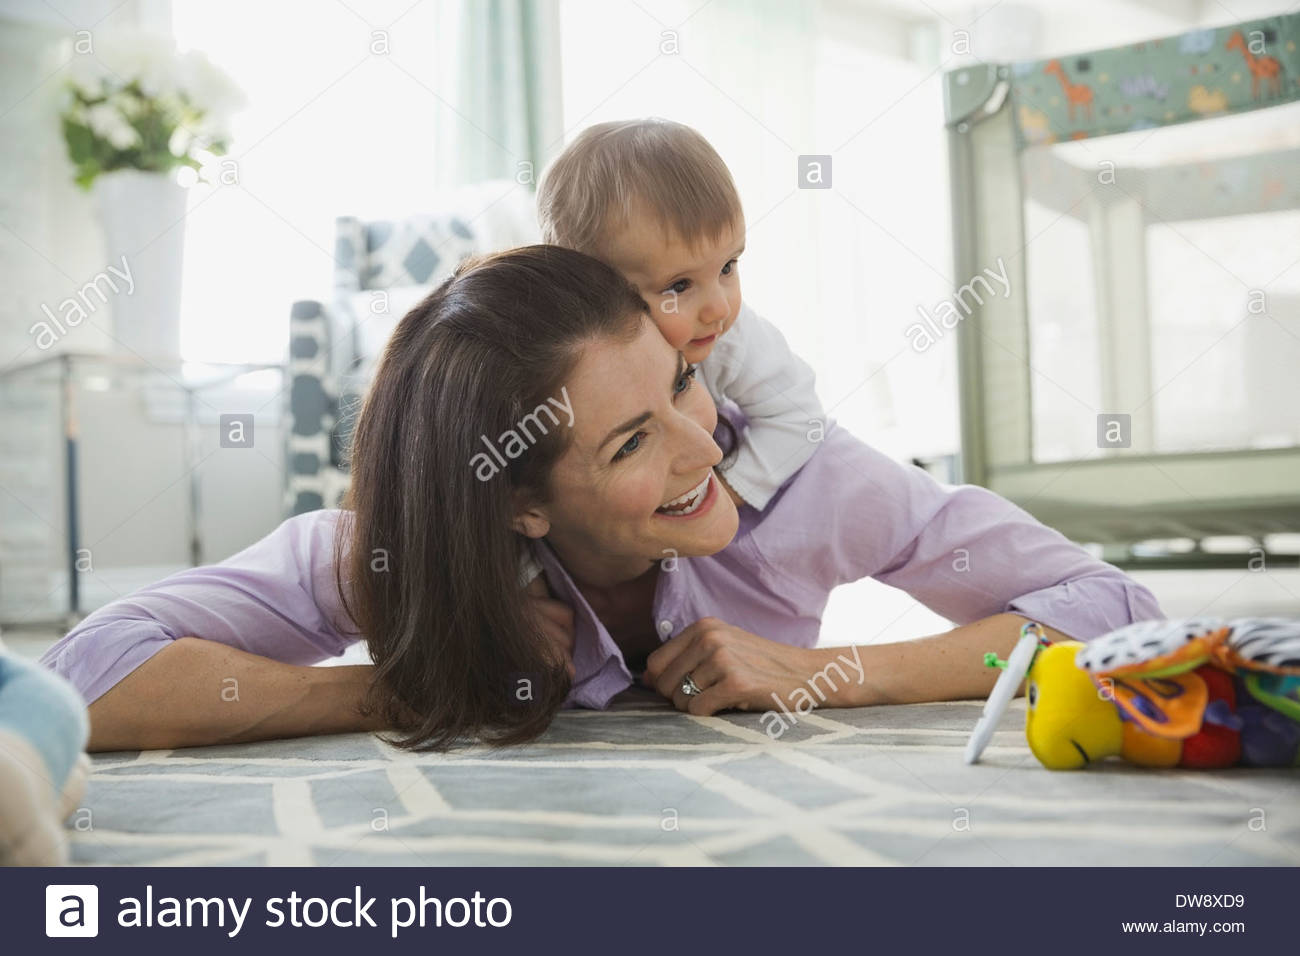 Cheerful woman playing with baby girl at home Stock Photo